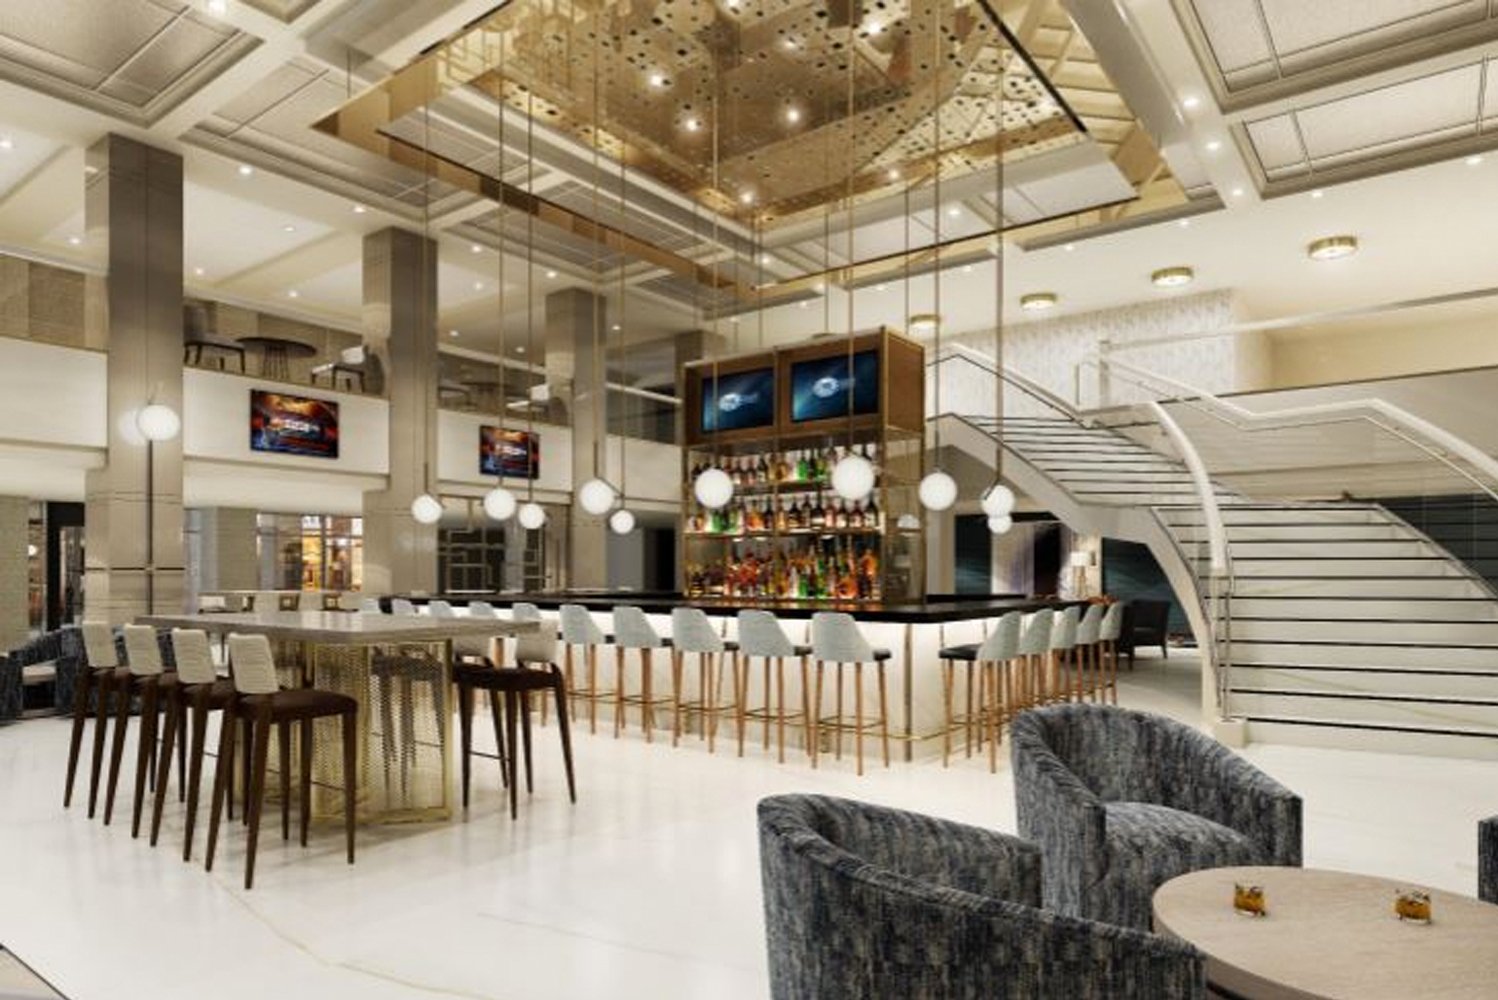 Chicago Marriott Downtown Magnificent Miles Reviver bar eyes April opening